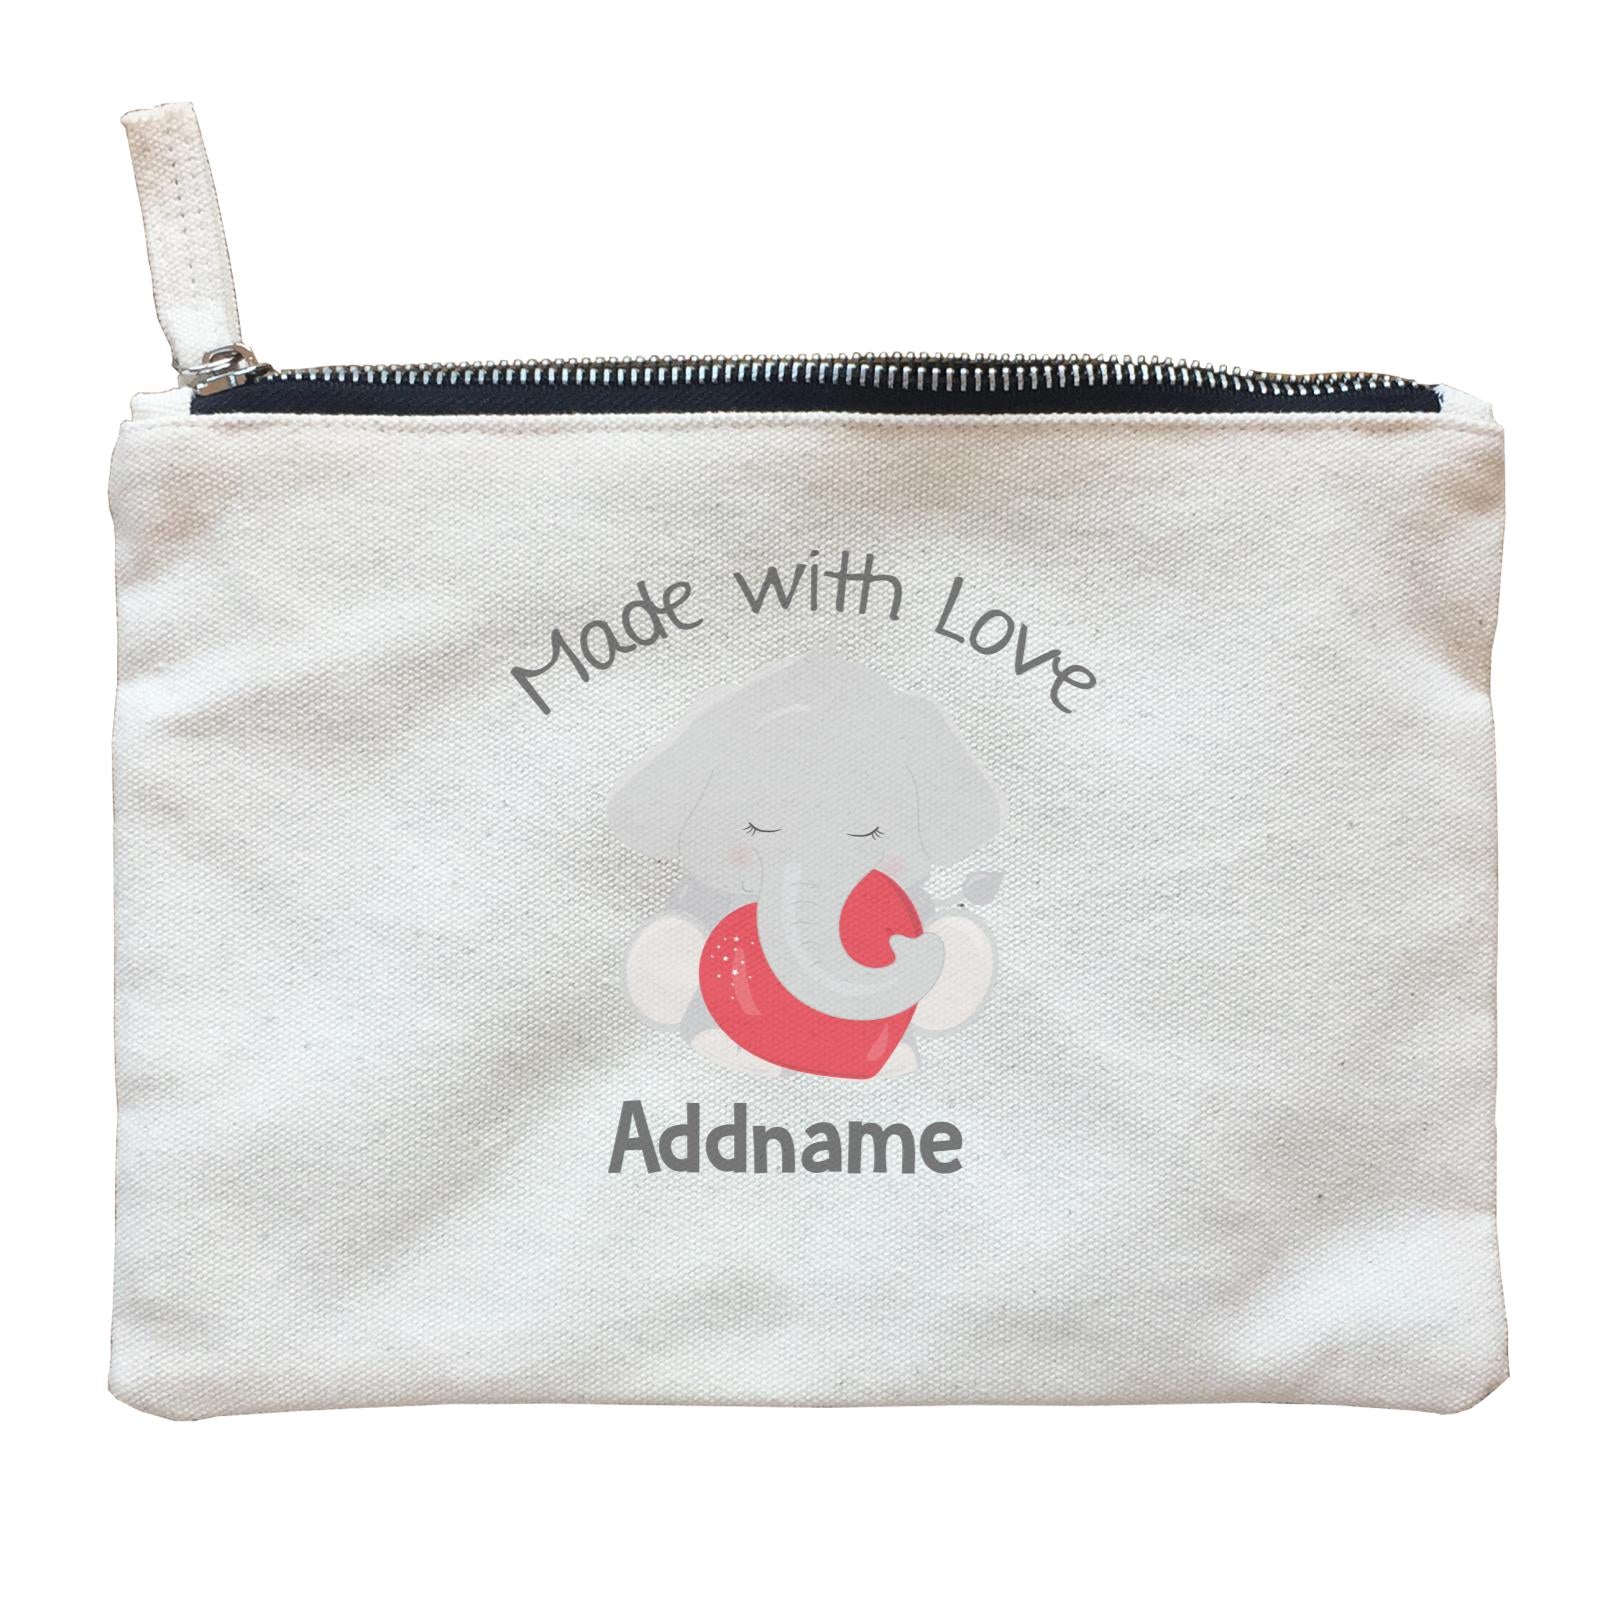 Animal Hearts Made With Love Elephant Addname Zipper Pouch